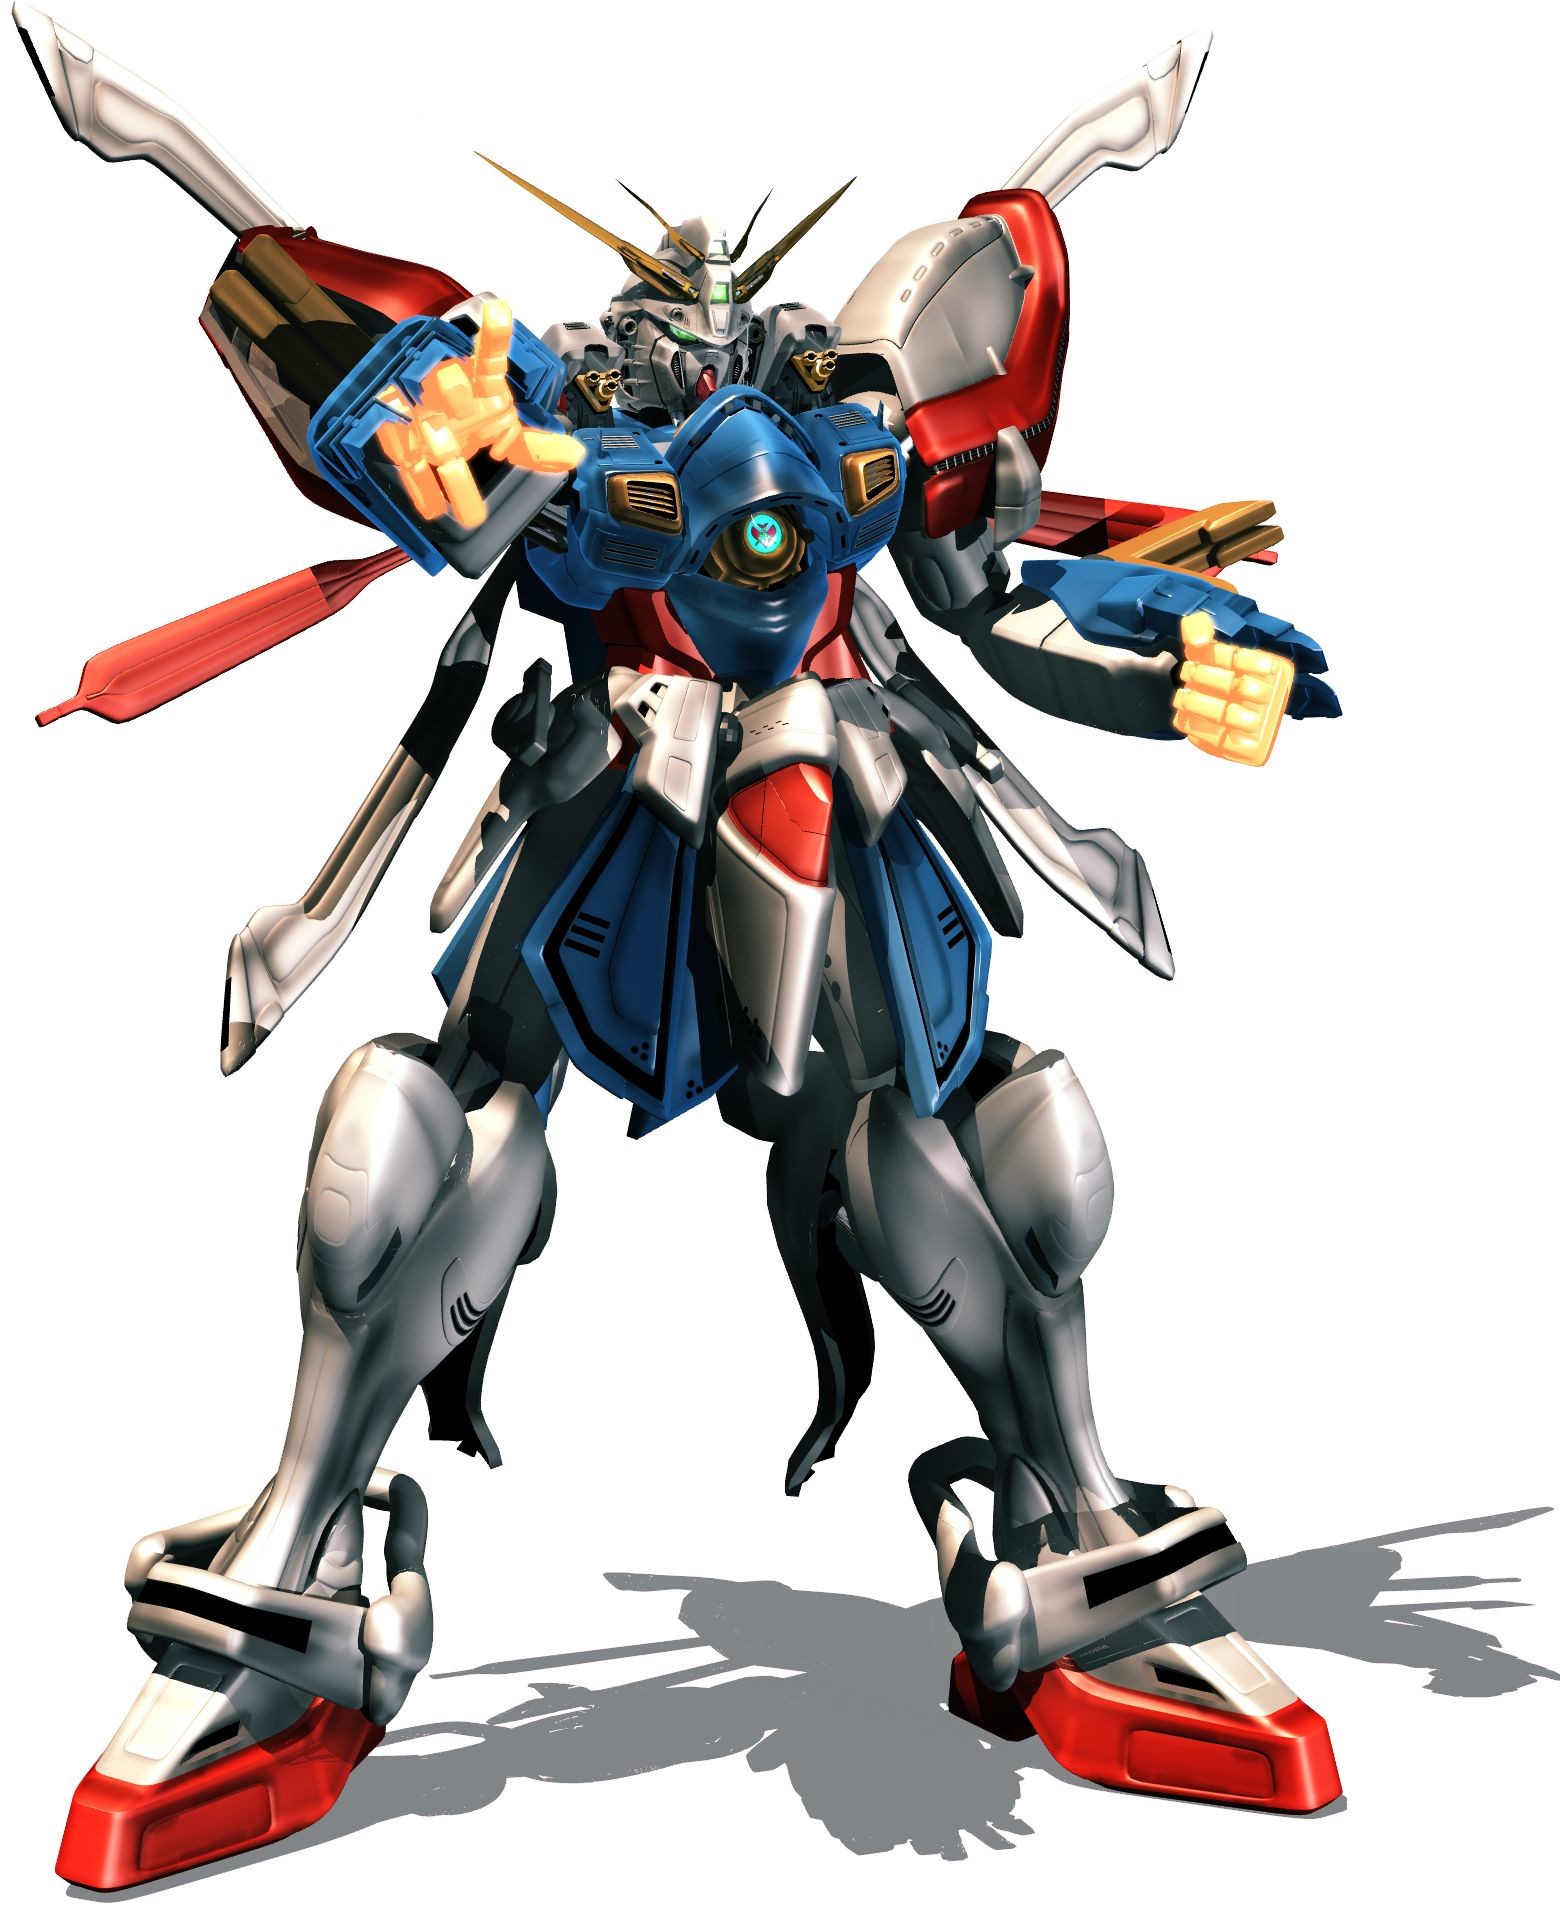 1560x1920 The Shining Gundam is a mobile fighter for the nation of Neo Japan built  for the Gundam Fight. It was featured in the anime Mobile Fighter G Gundam  and ...